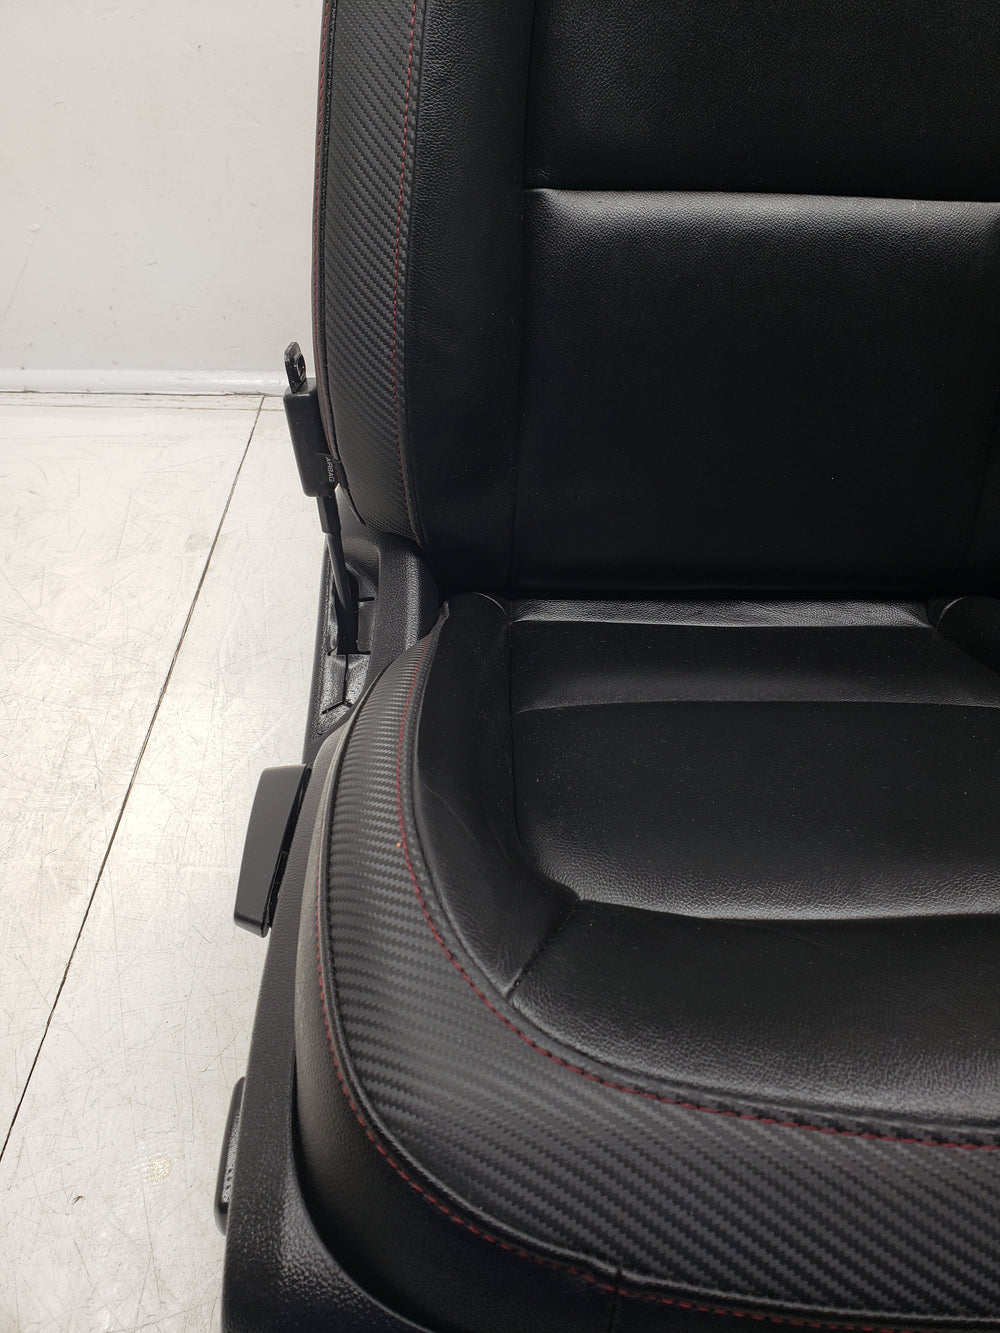 GMC Canyon Seats Heated All Terrain Edition, 2015 - 2022 Chevy Colorado #1317 | Picture # 5 | OEM Seats